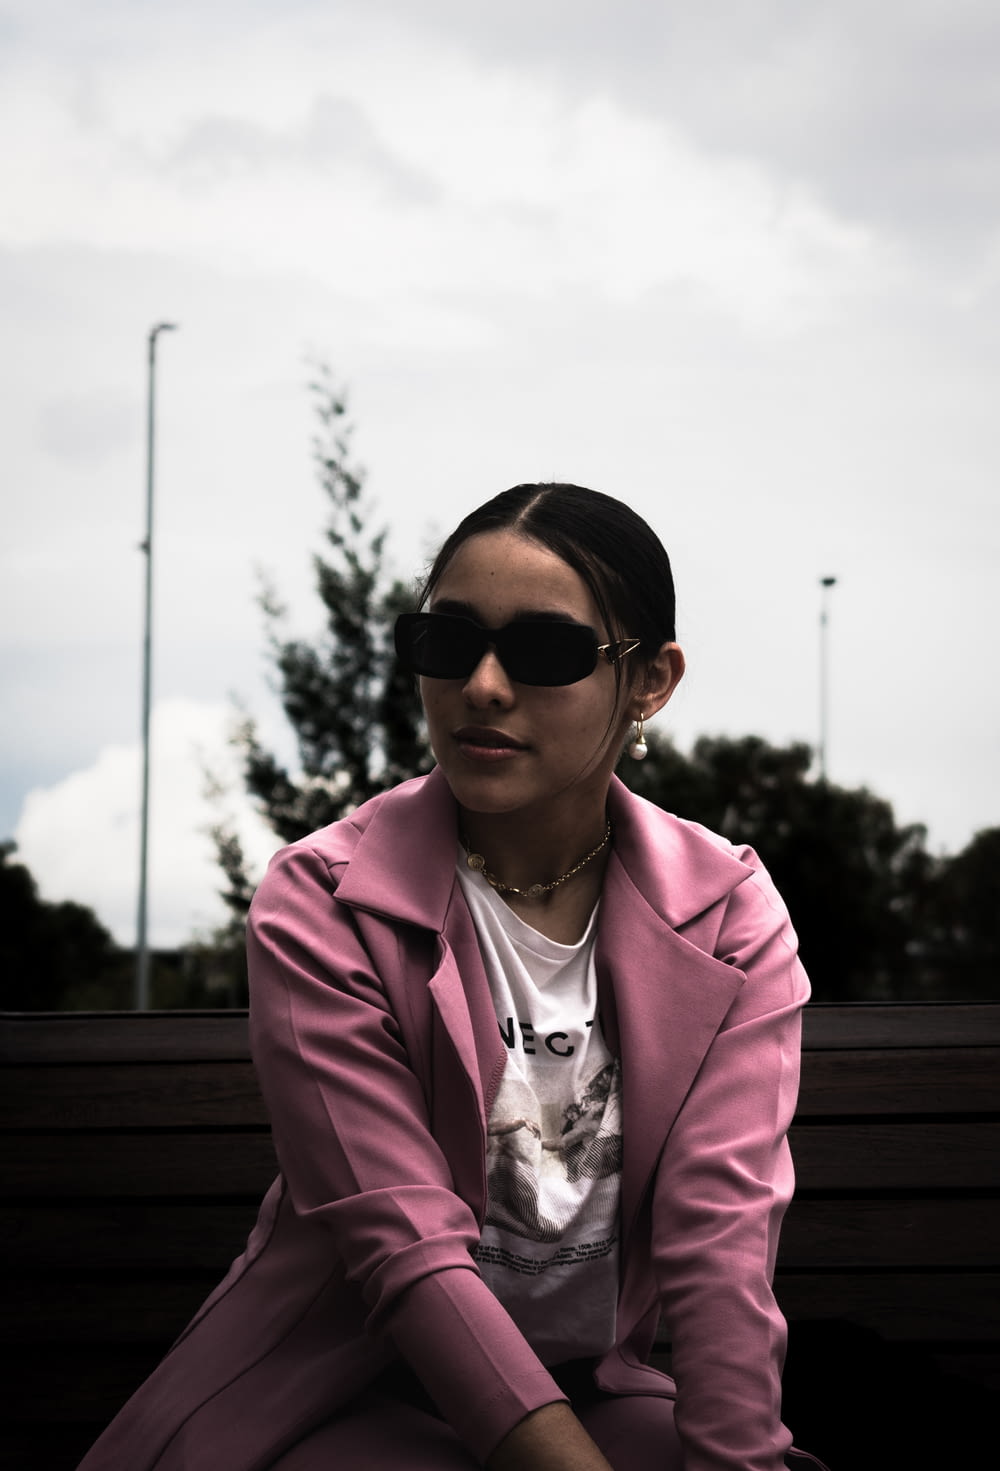 a woman wearing sunglasses sitting on a bench